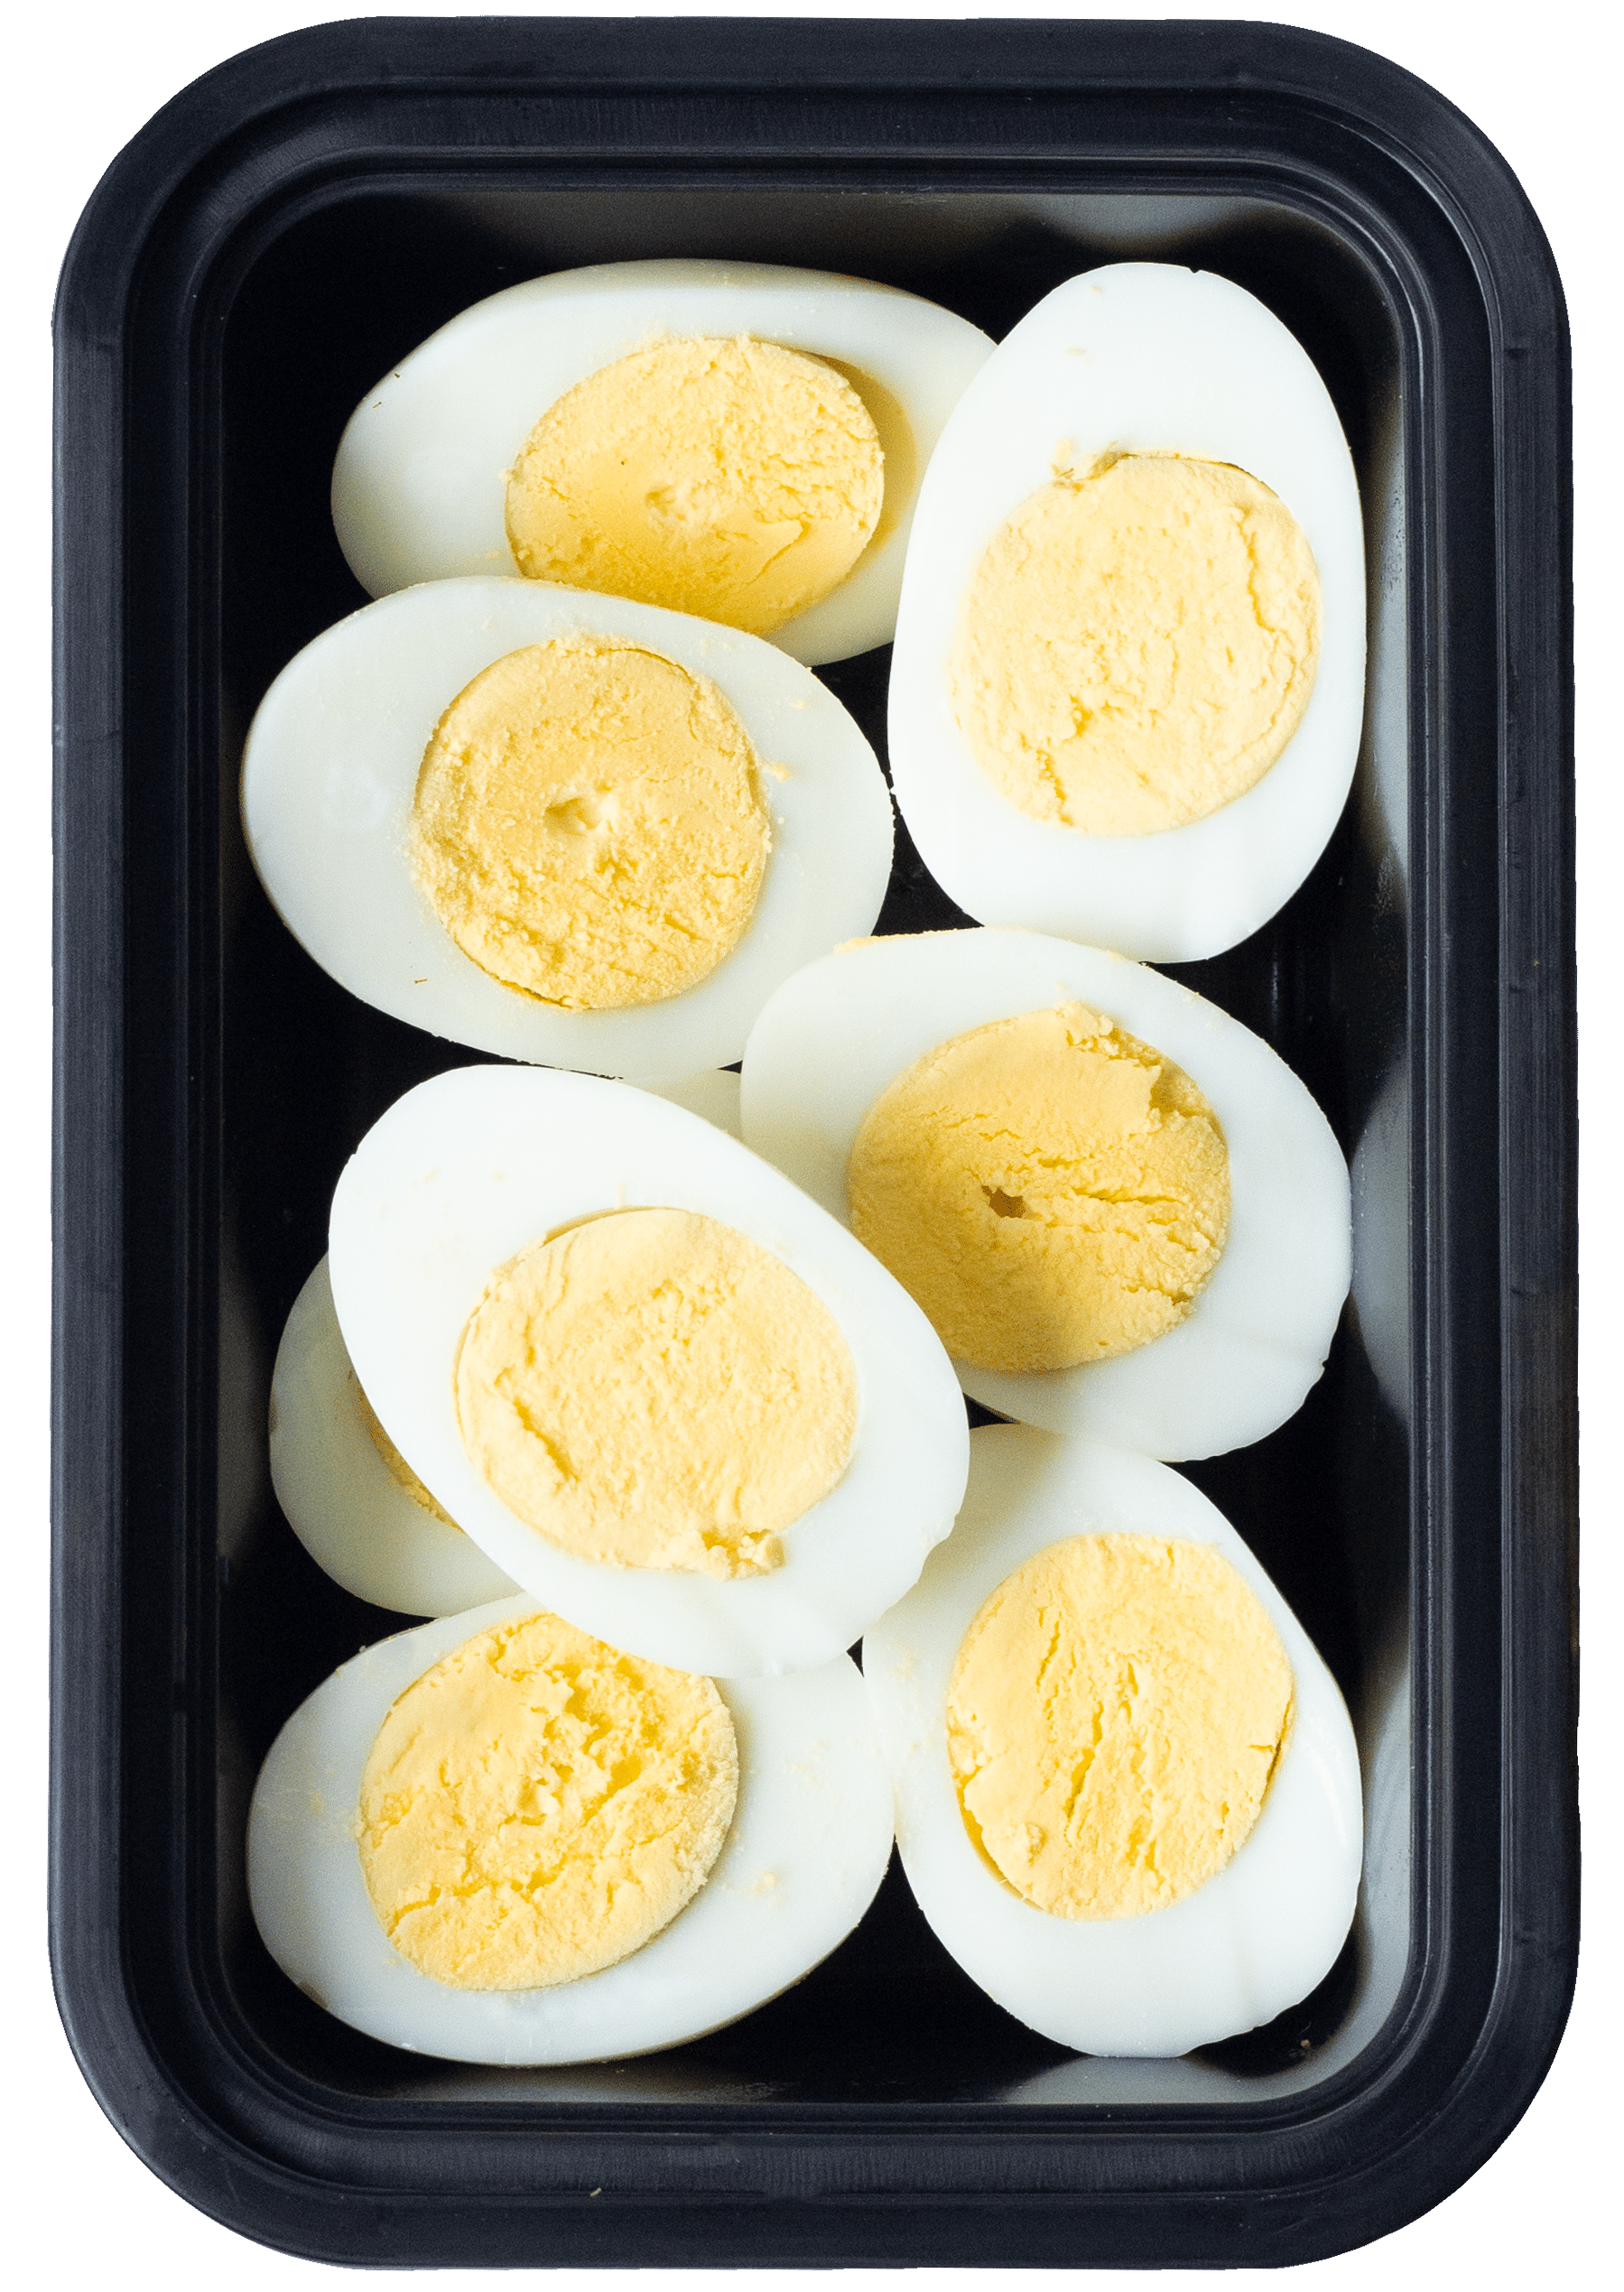 Hard Boiled Eggs - Jimmy's Famous Meals